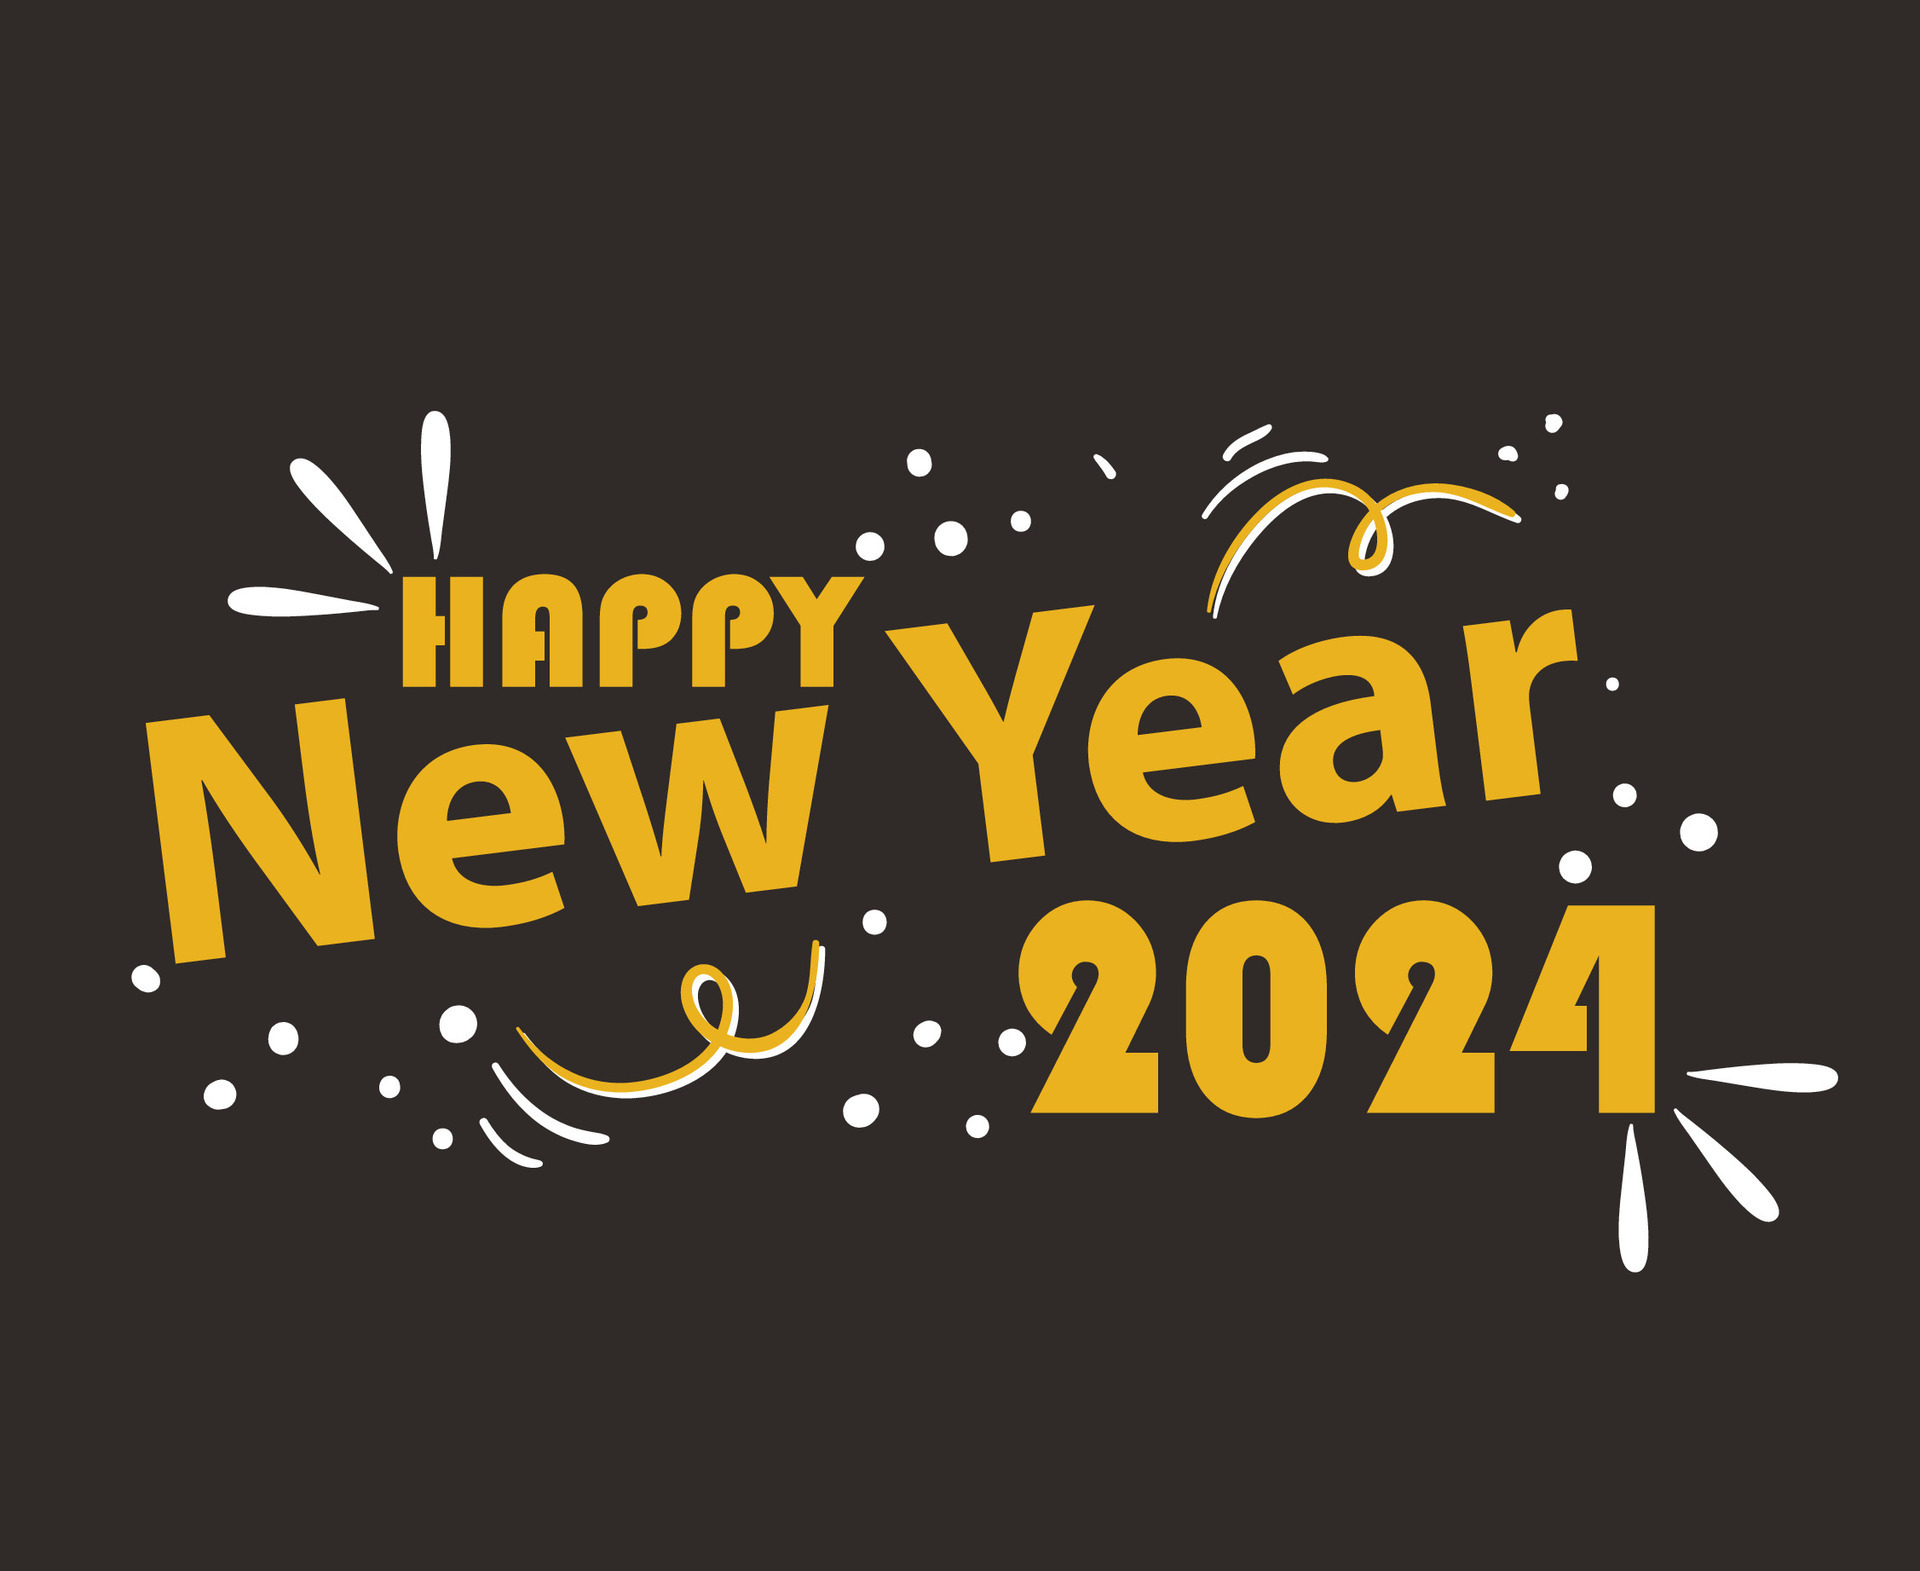 Happy new year 2024 illustration in yellow color text on white